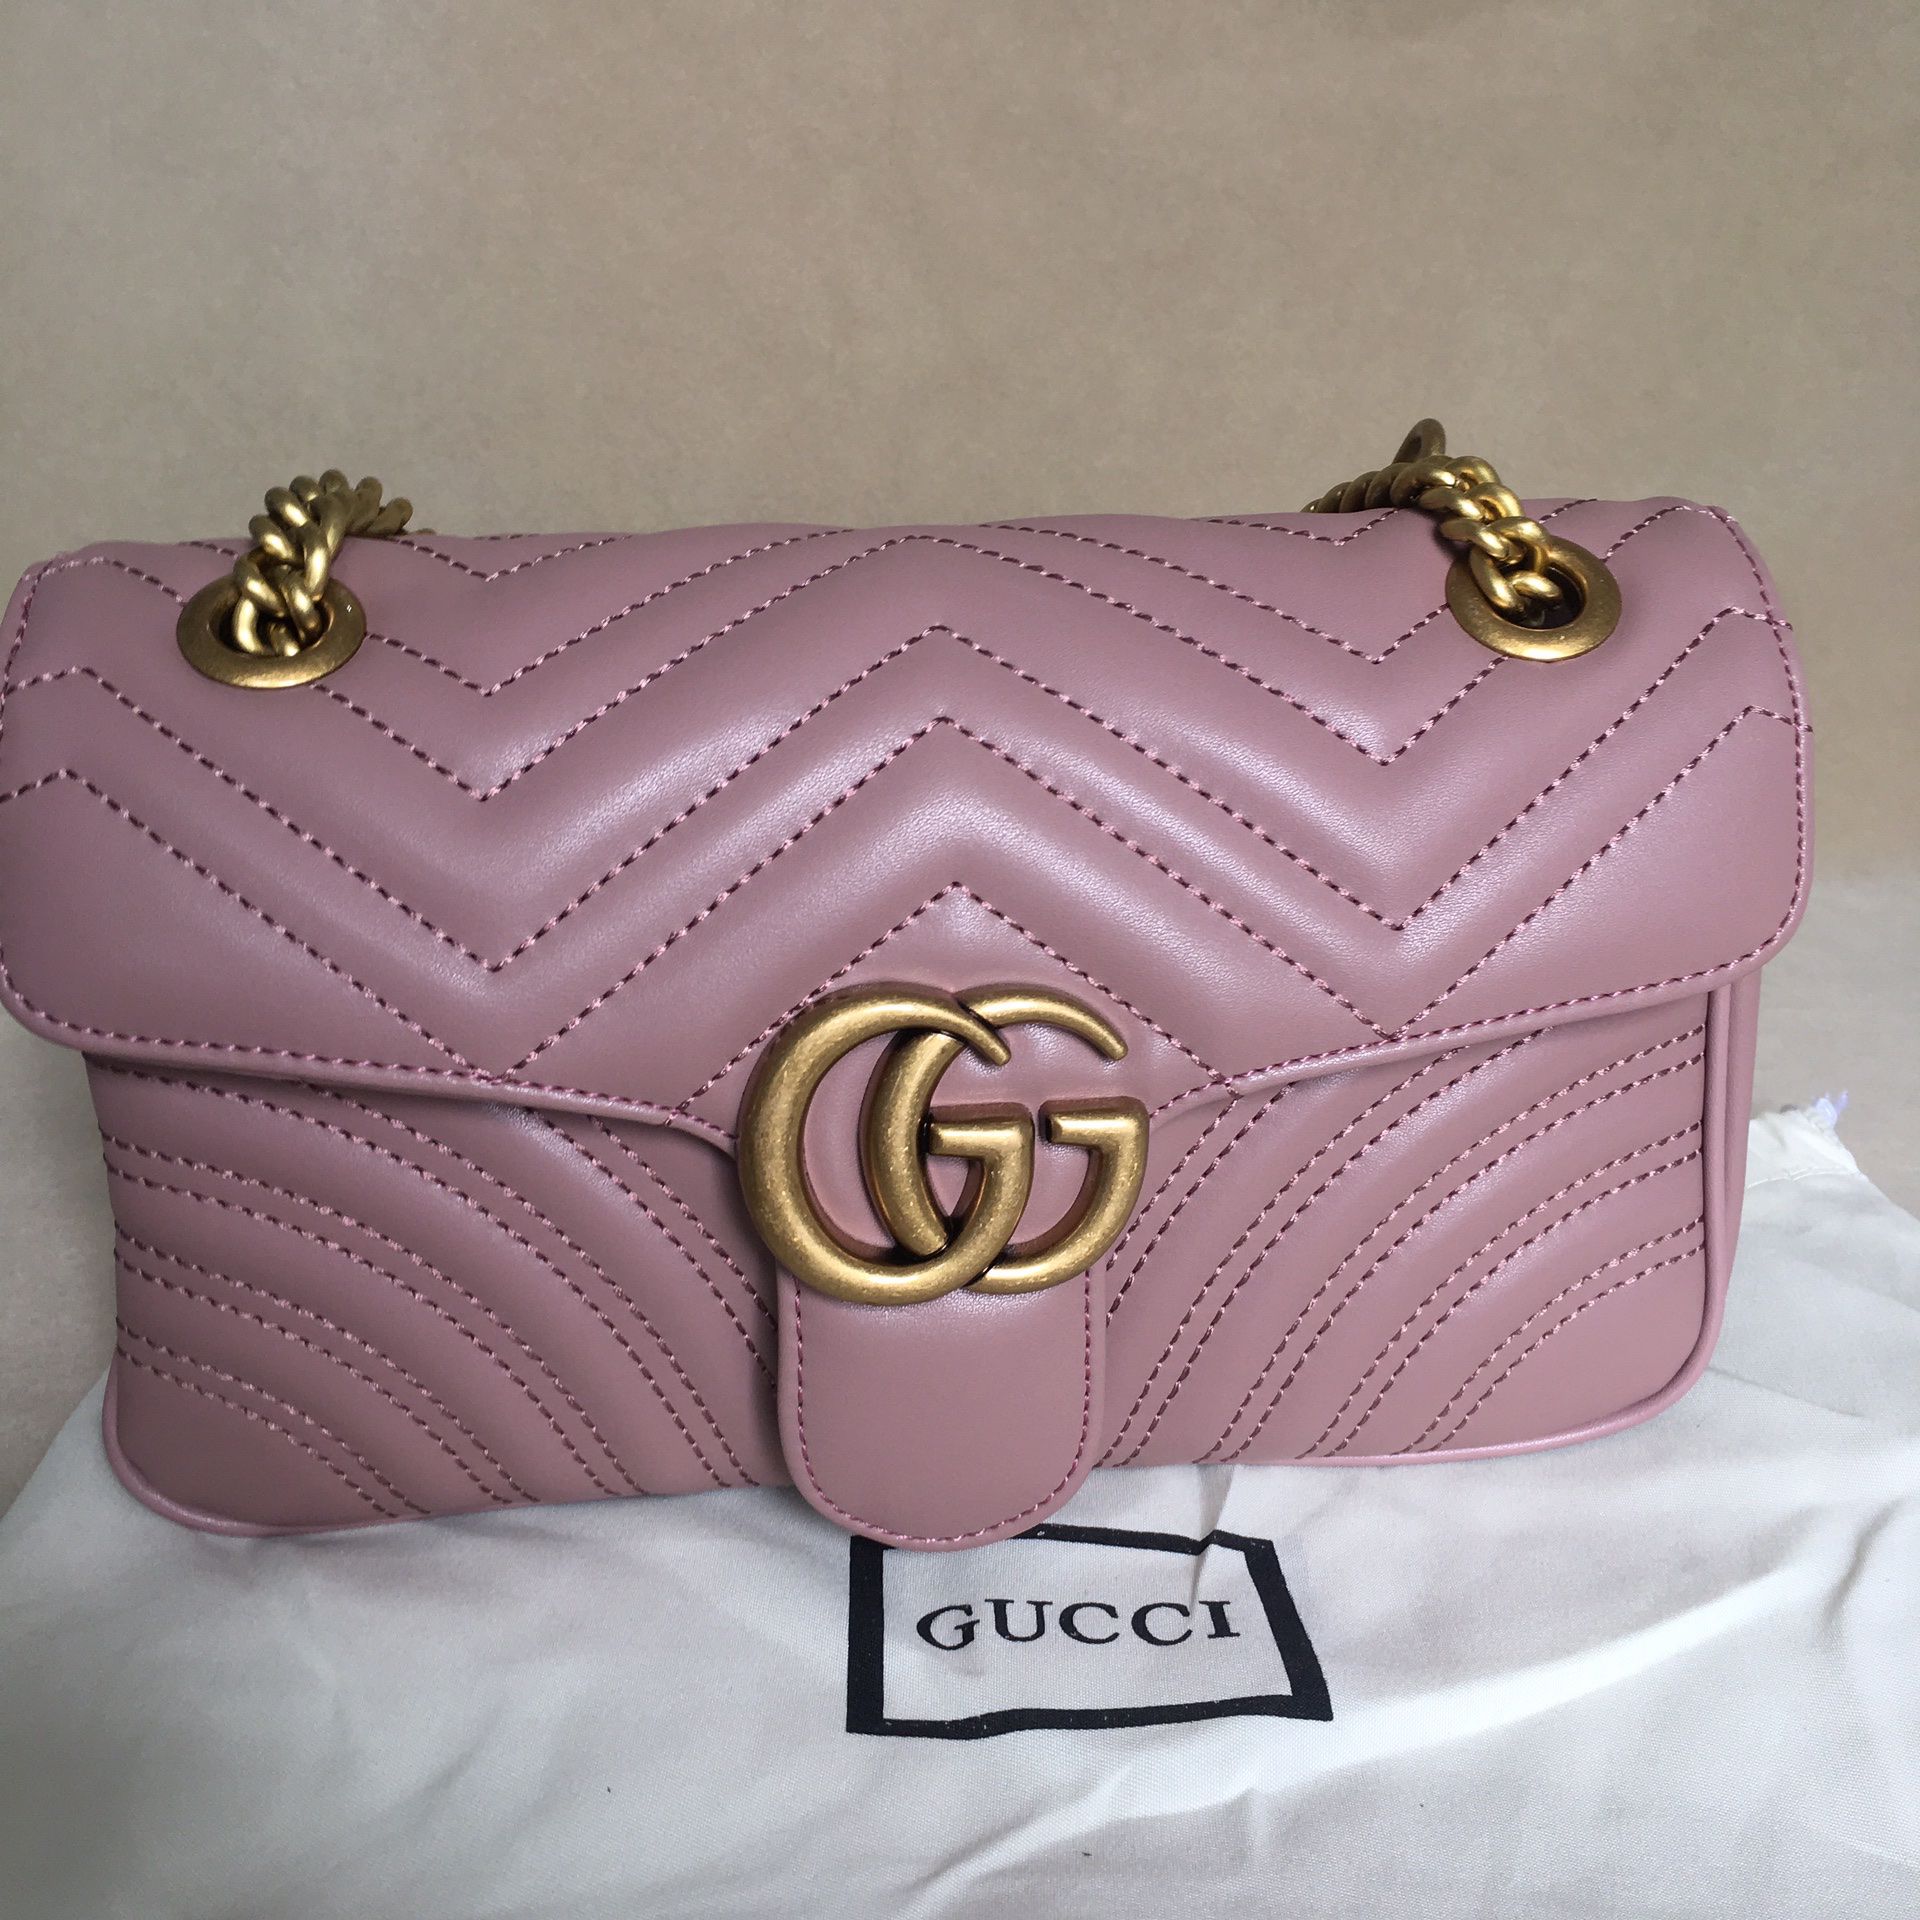 Authentic GUCCI Bag Heart-shaped Pink Bag Women's Shoulder Bag for Sale in  El Paso, TX - OfferUp